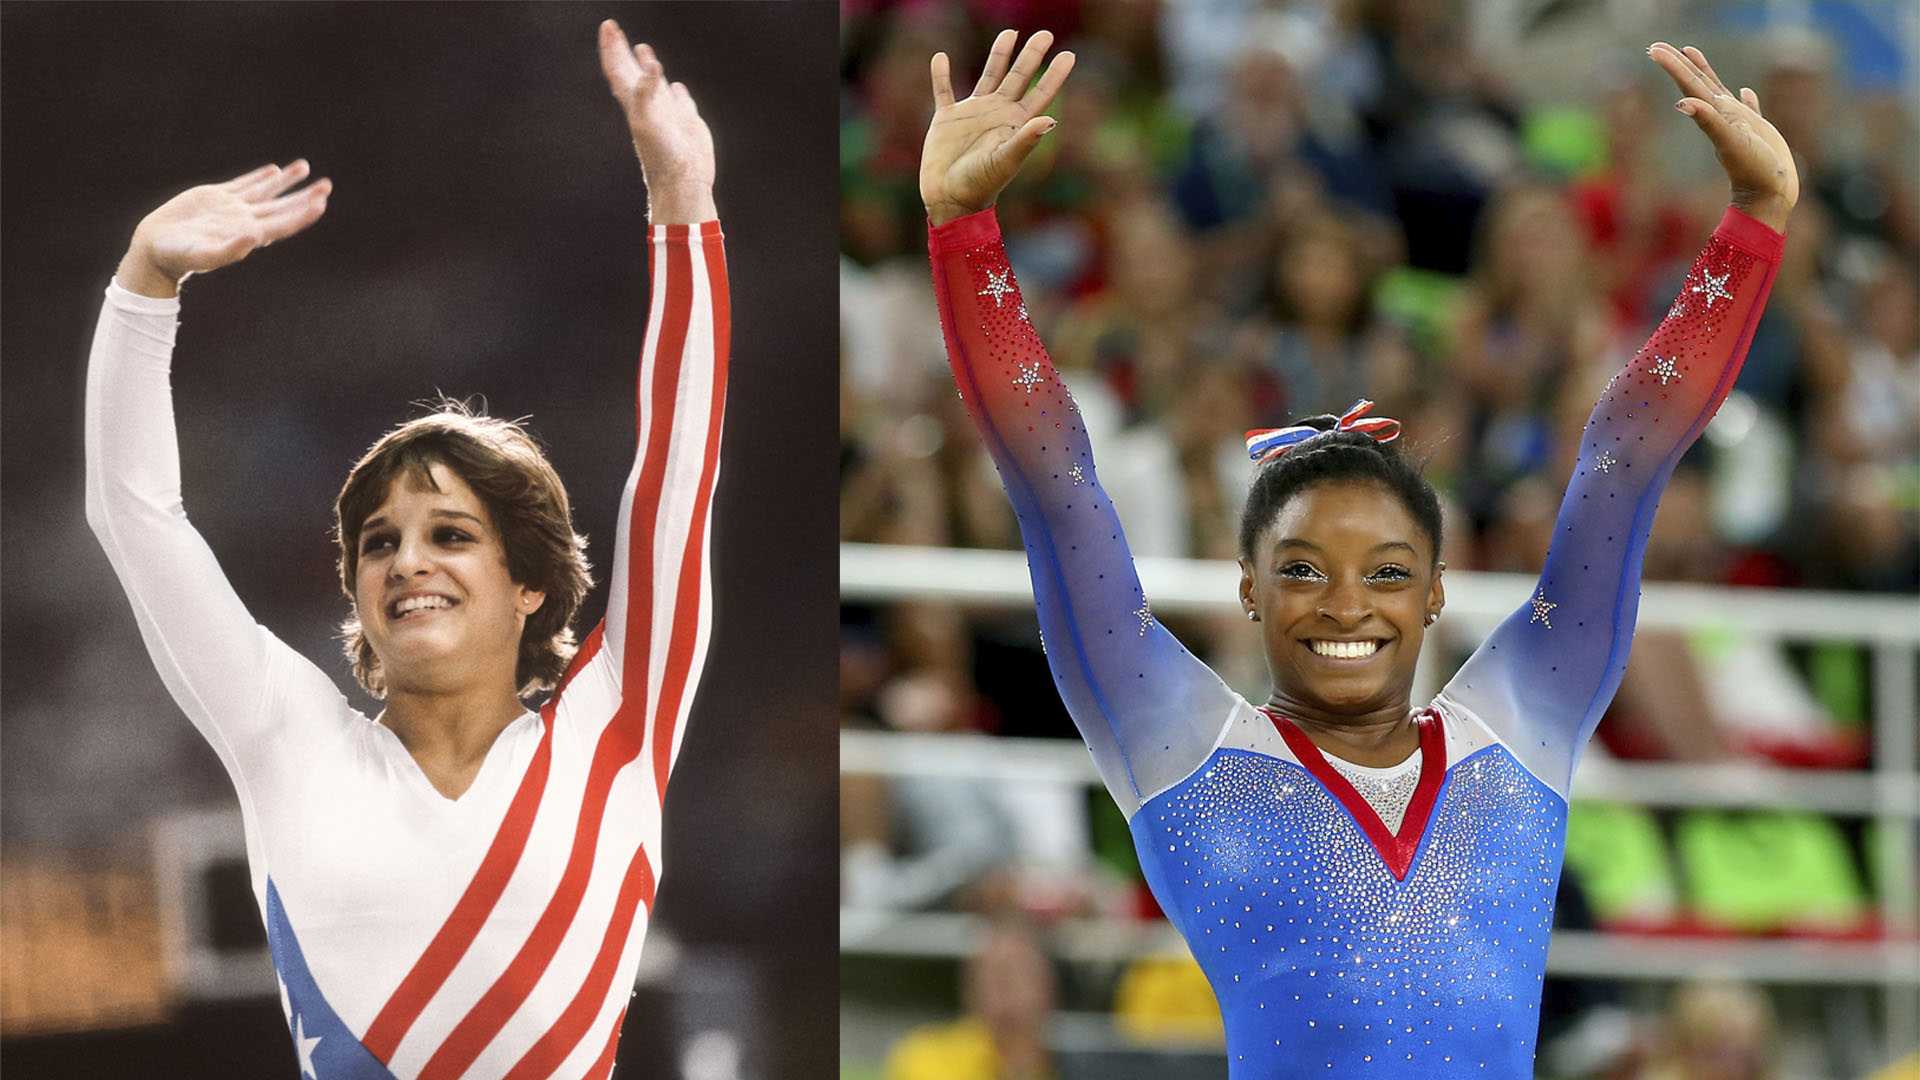 See how much Team USA's gymnastics uniforms have changed over the years